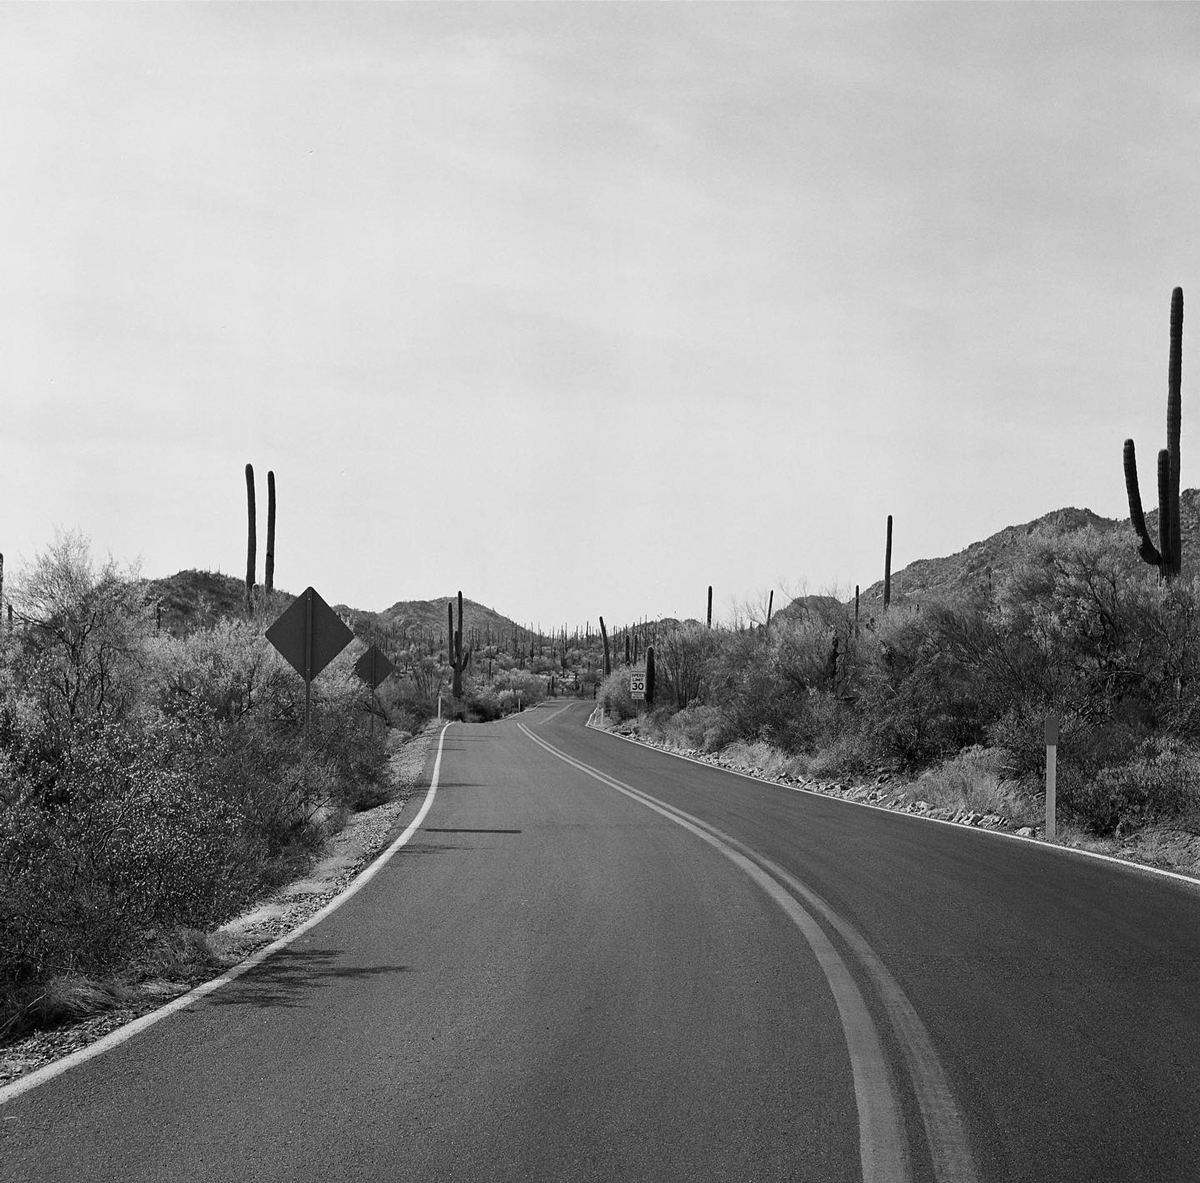 Road with cacti and plants surrounding the road